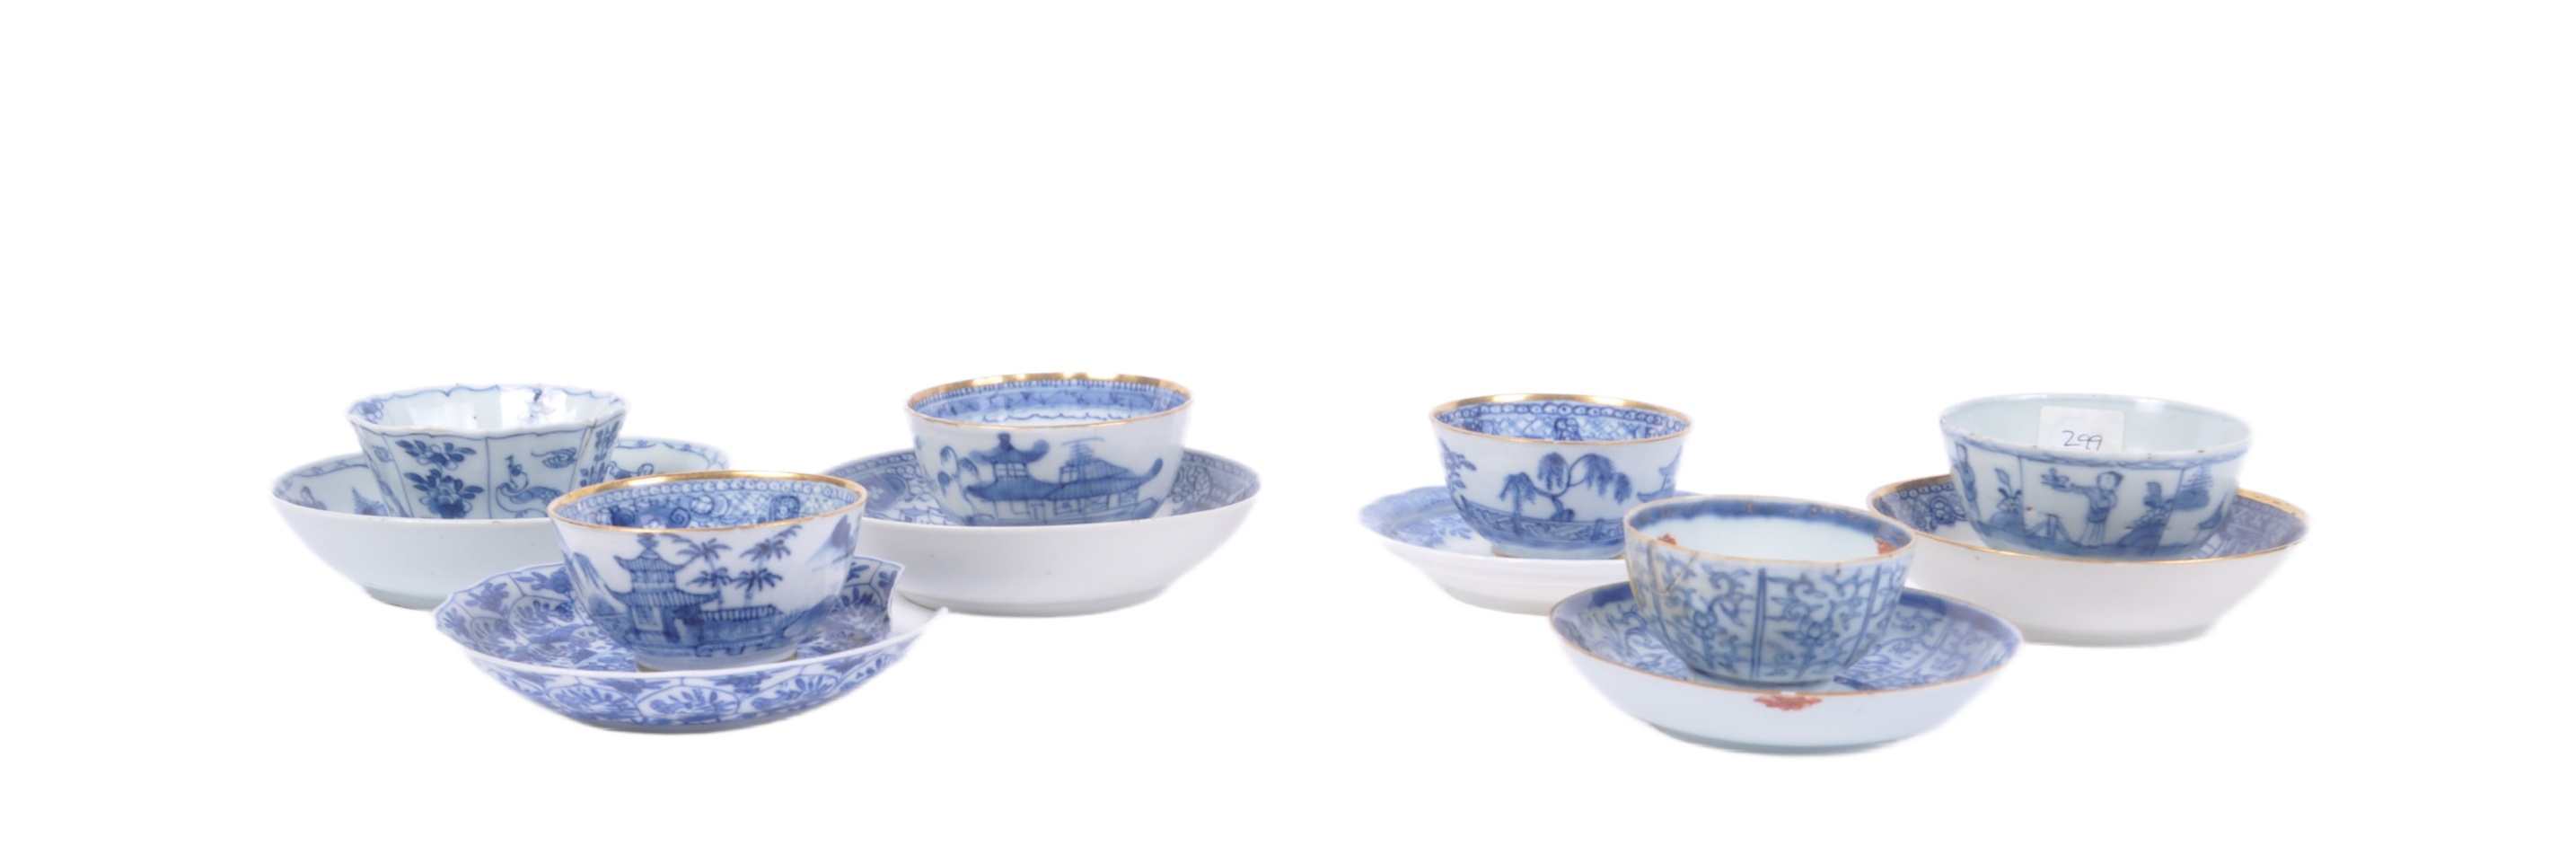 COLLECTION OF 18TH & 19TH CENTURY CHINESE PORCELAIN